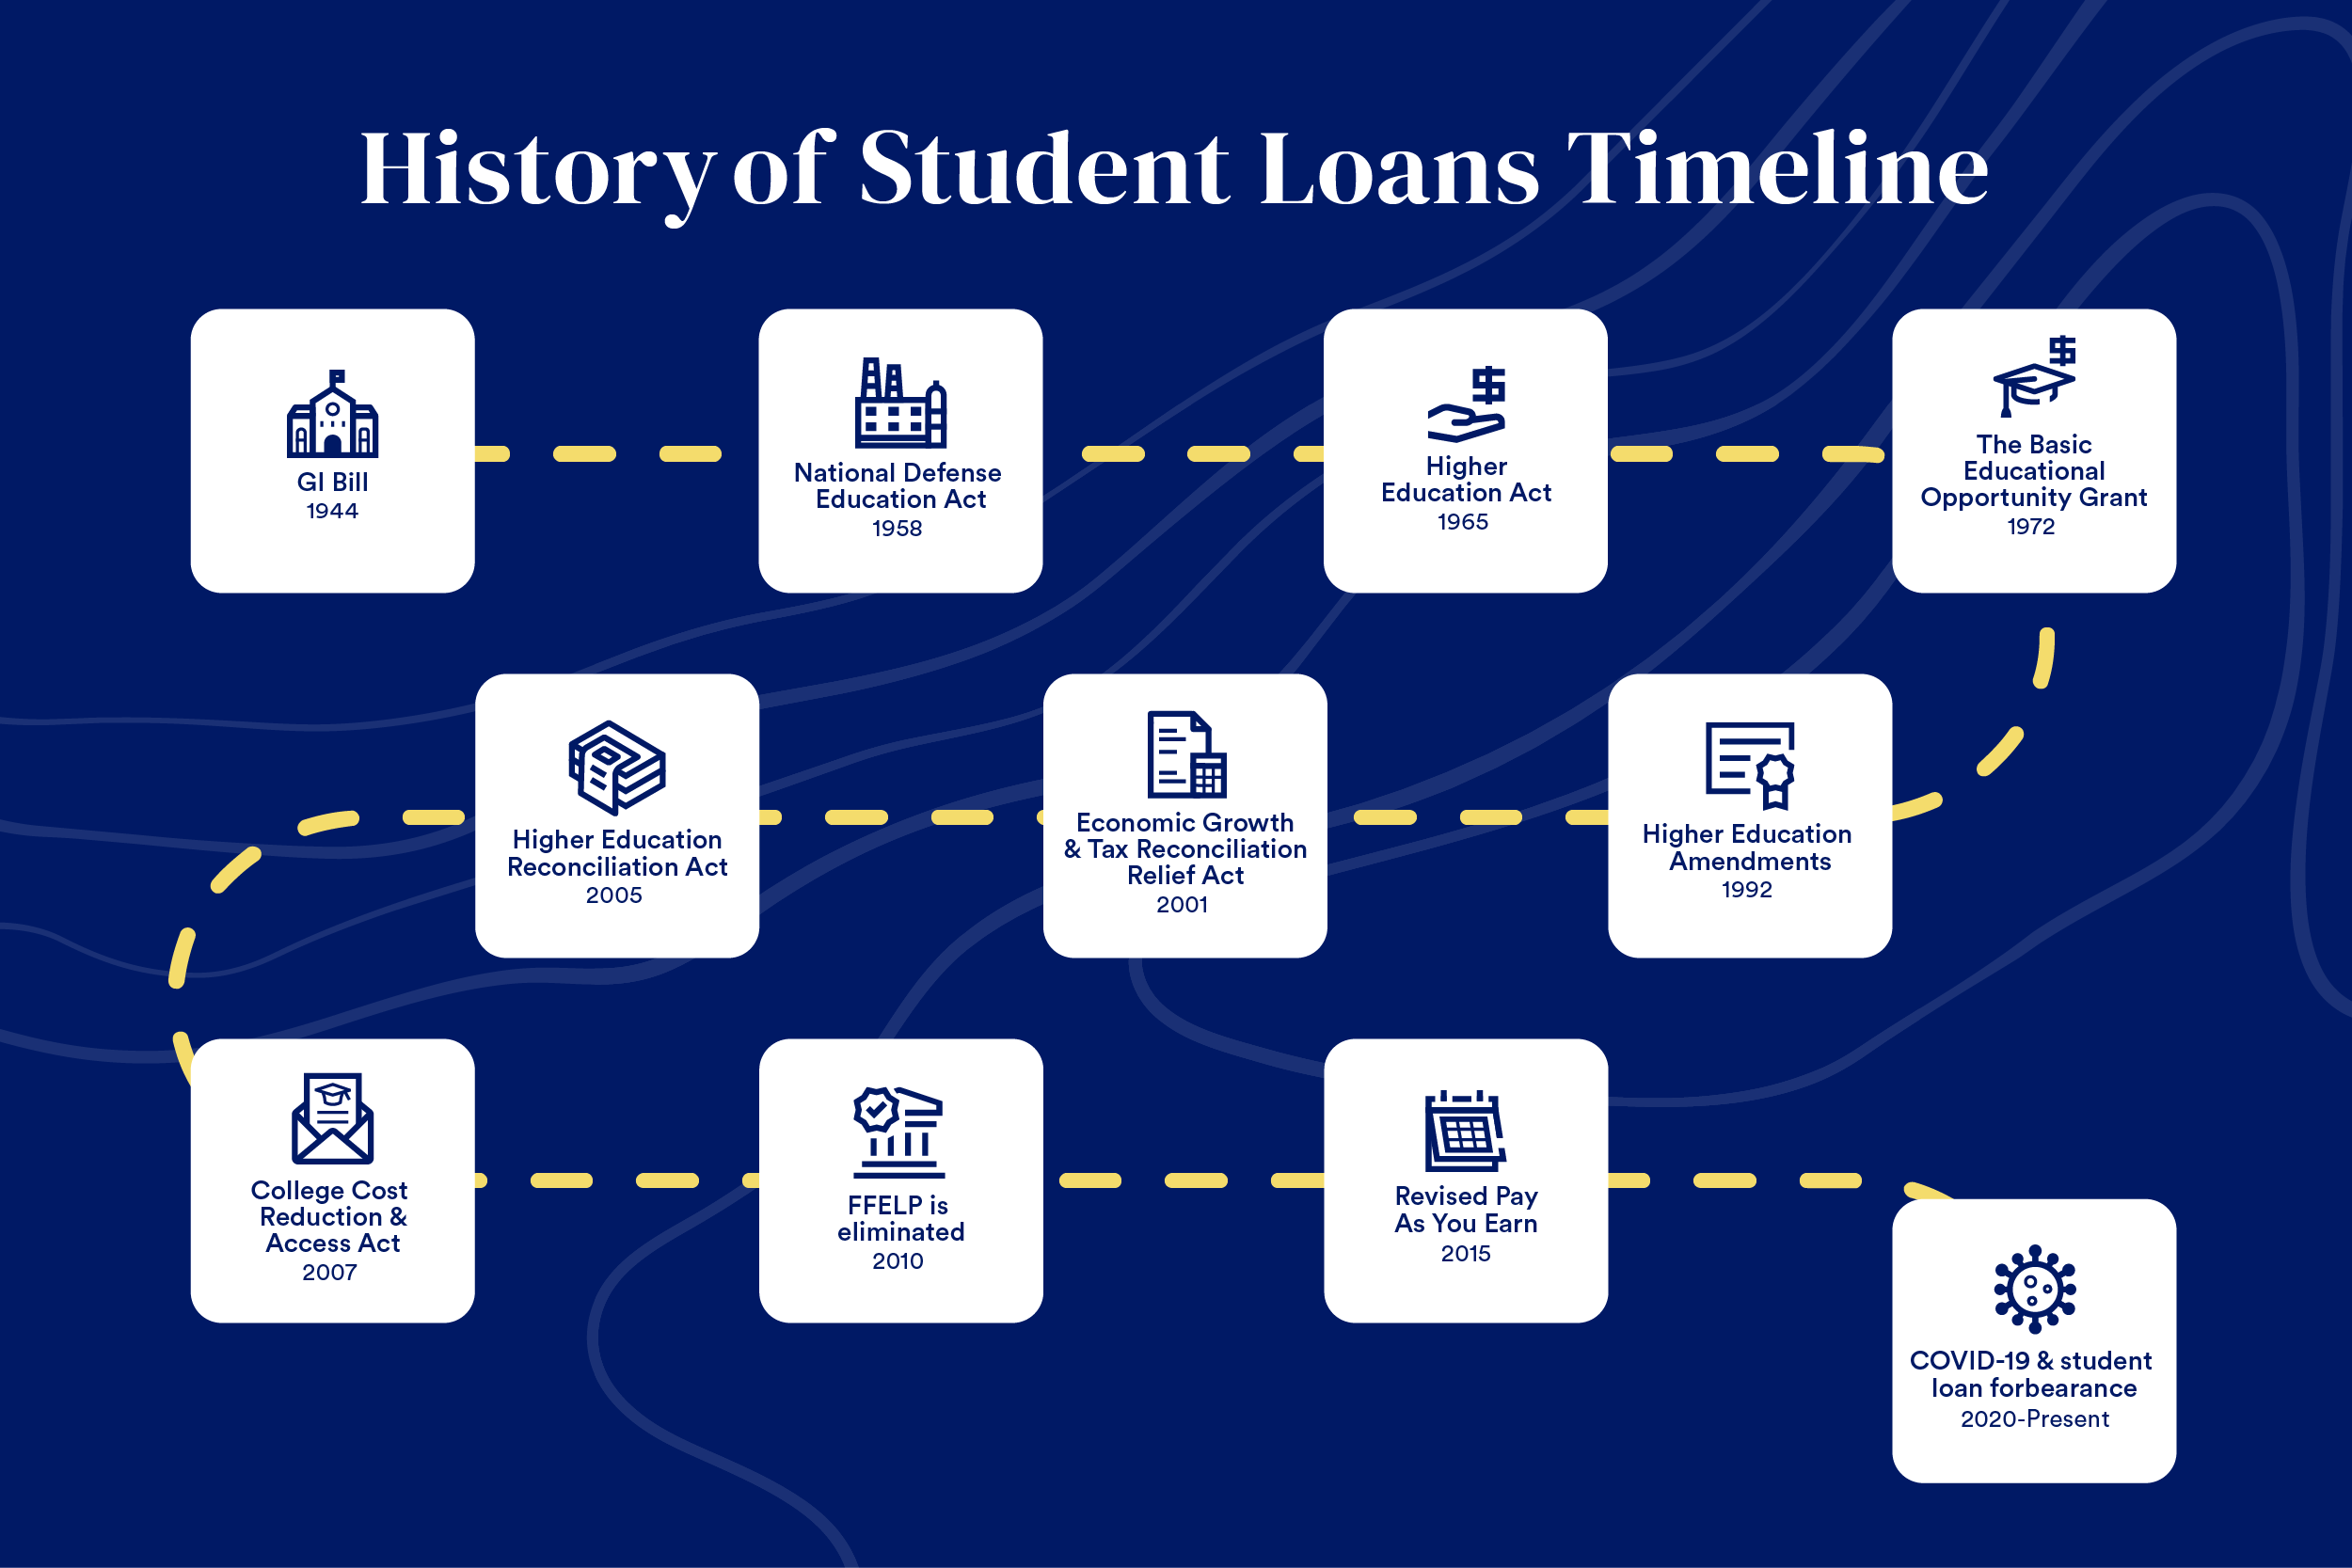 A timeline showing key points in the history of student loans